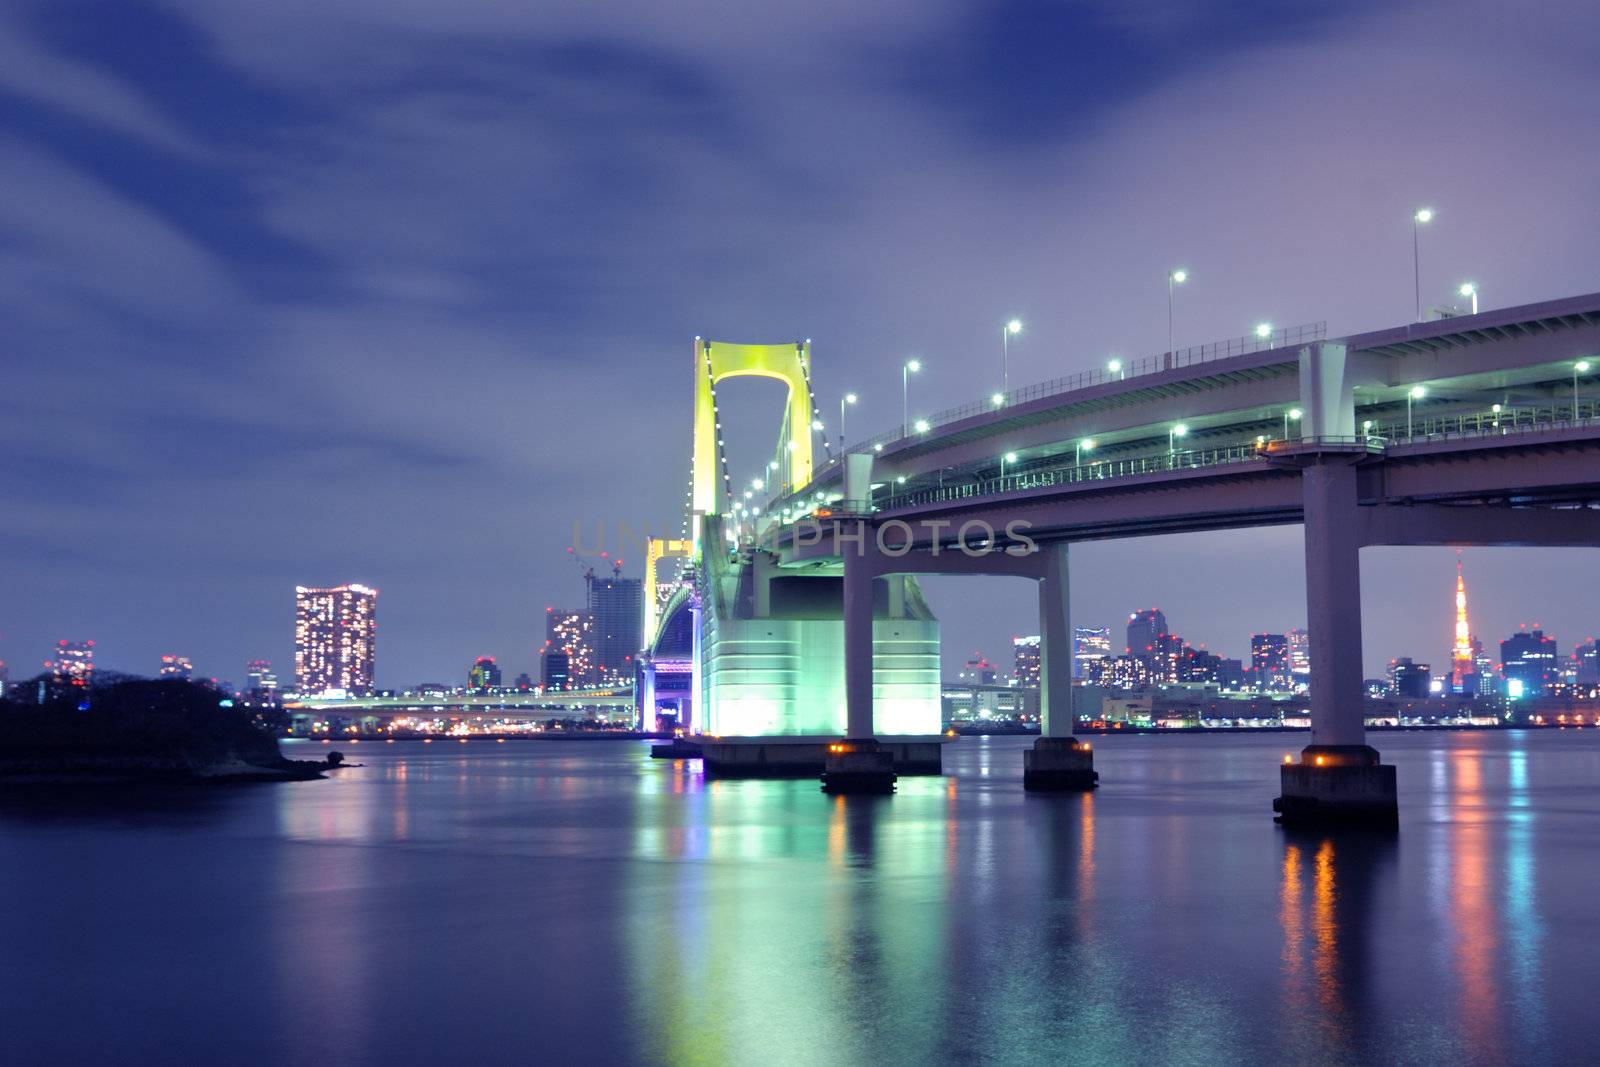 one of famous Tokyo landmarks, Tokyo Rainbow suspension bridge supports over night waters with scenic colourful illumination